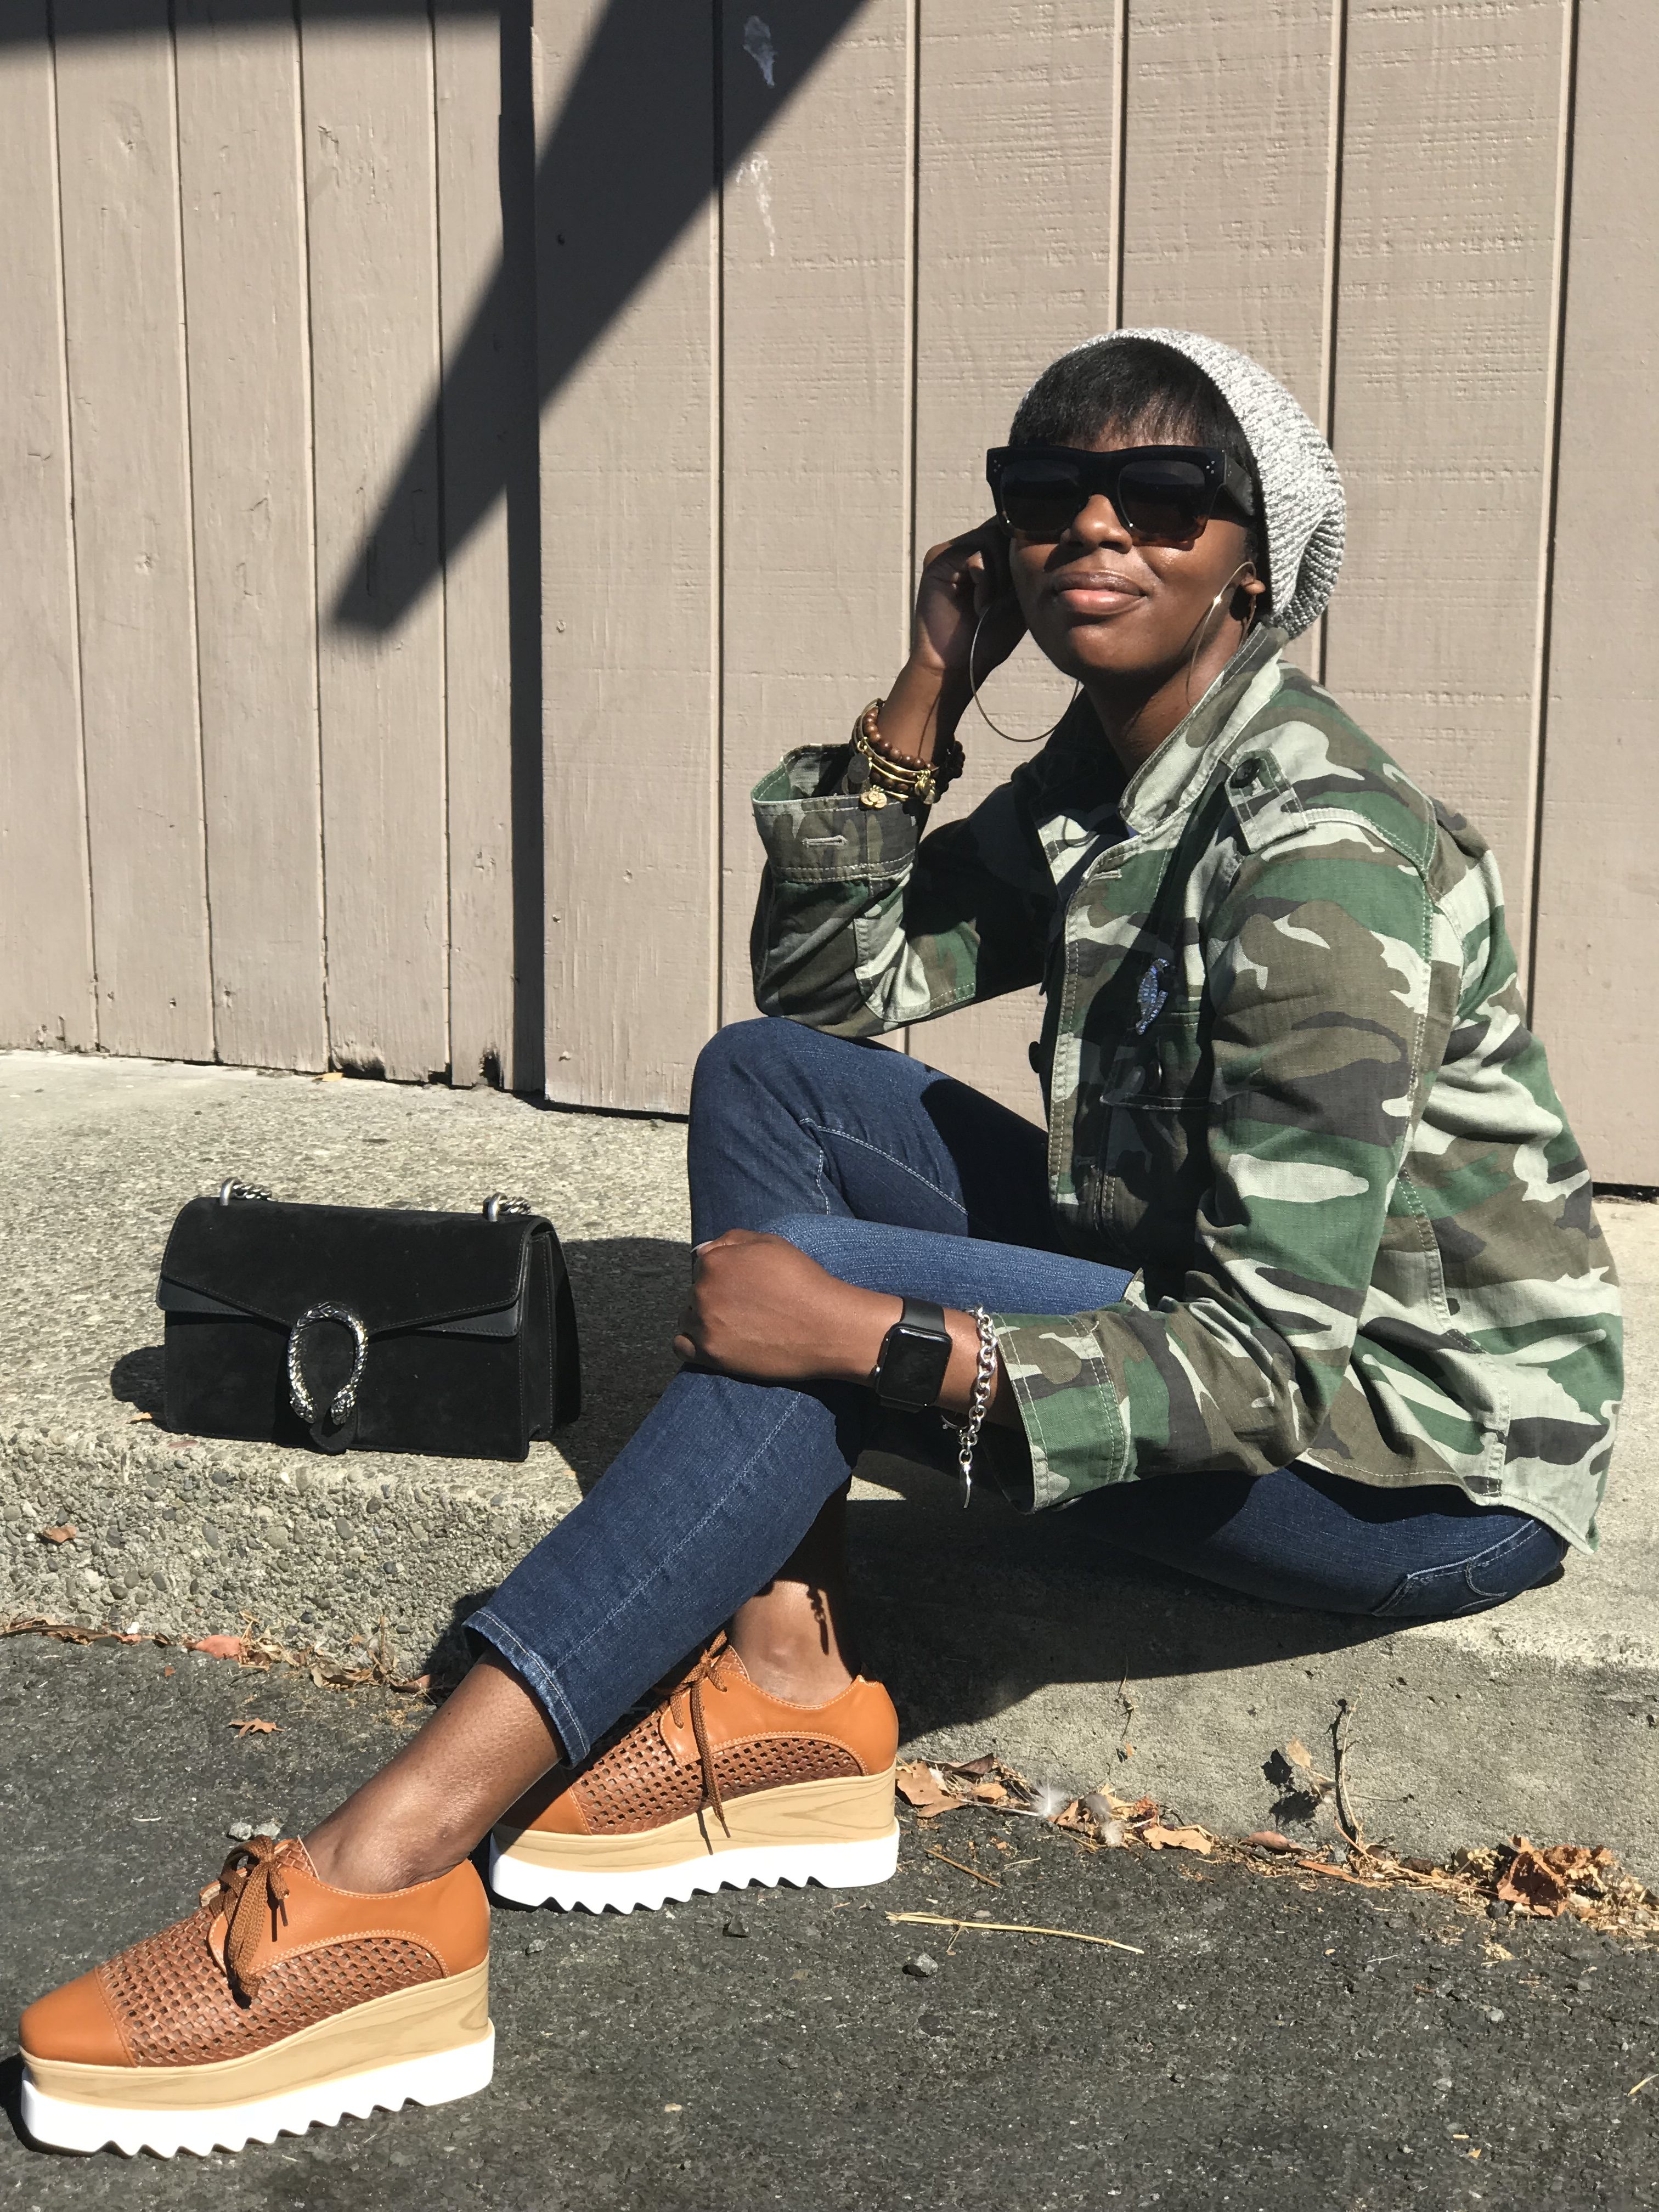 Jcrew Cotton Beanie Celine Sunglasses Liars & Lovers ASOS Extra Large Gold Hoop Earrings Jcrew Camouflage Camo Utility Shirt Jacket AG The Stilt Cropped Jeans Stella McCartney Elyse Woven Platform Sneakers Gucci Dionysus Black Suede Shoulder Bag Chanel Brooch San Francisco SF Bay Area California Fashion Style Blog Blogger